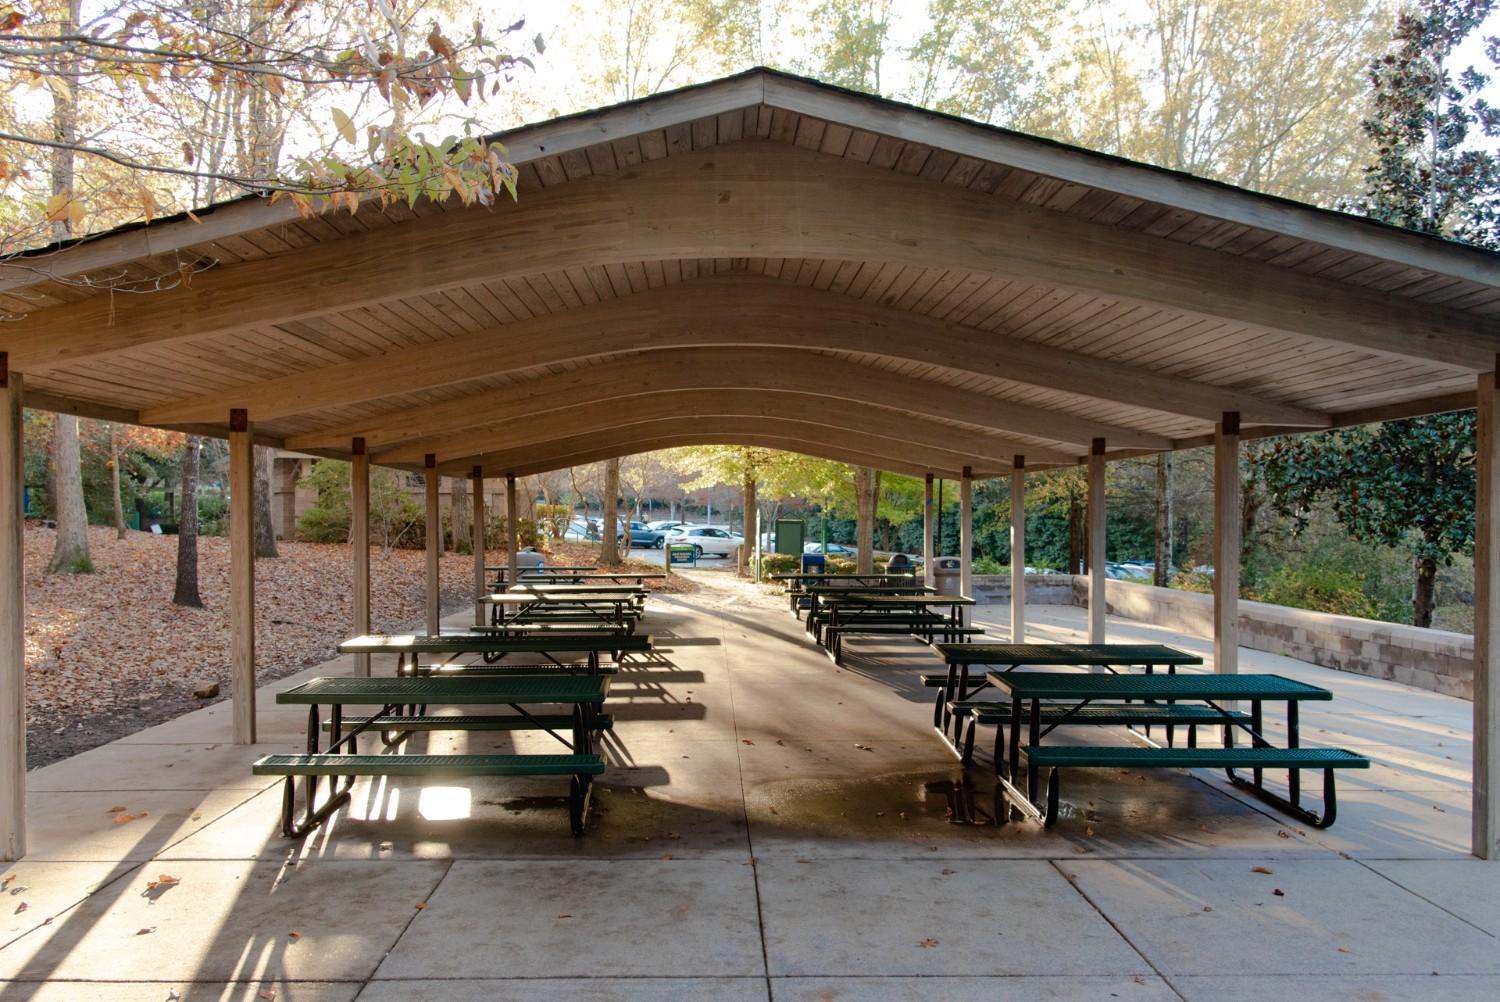 North Cary Park Shelter